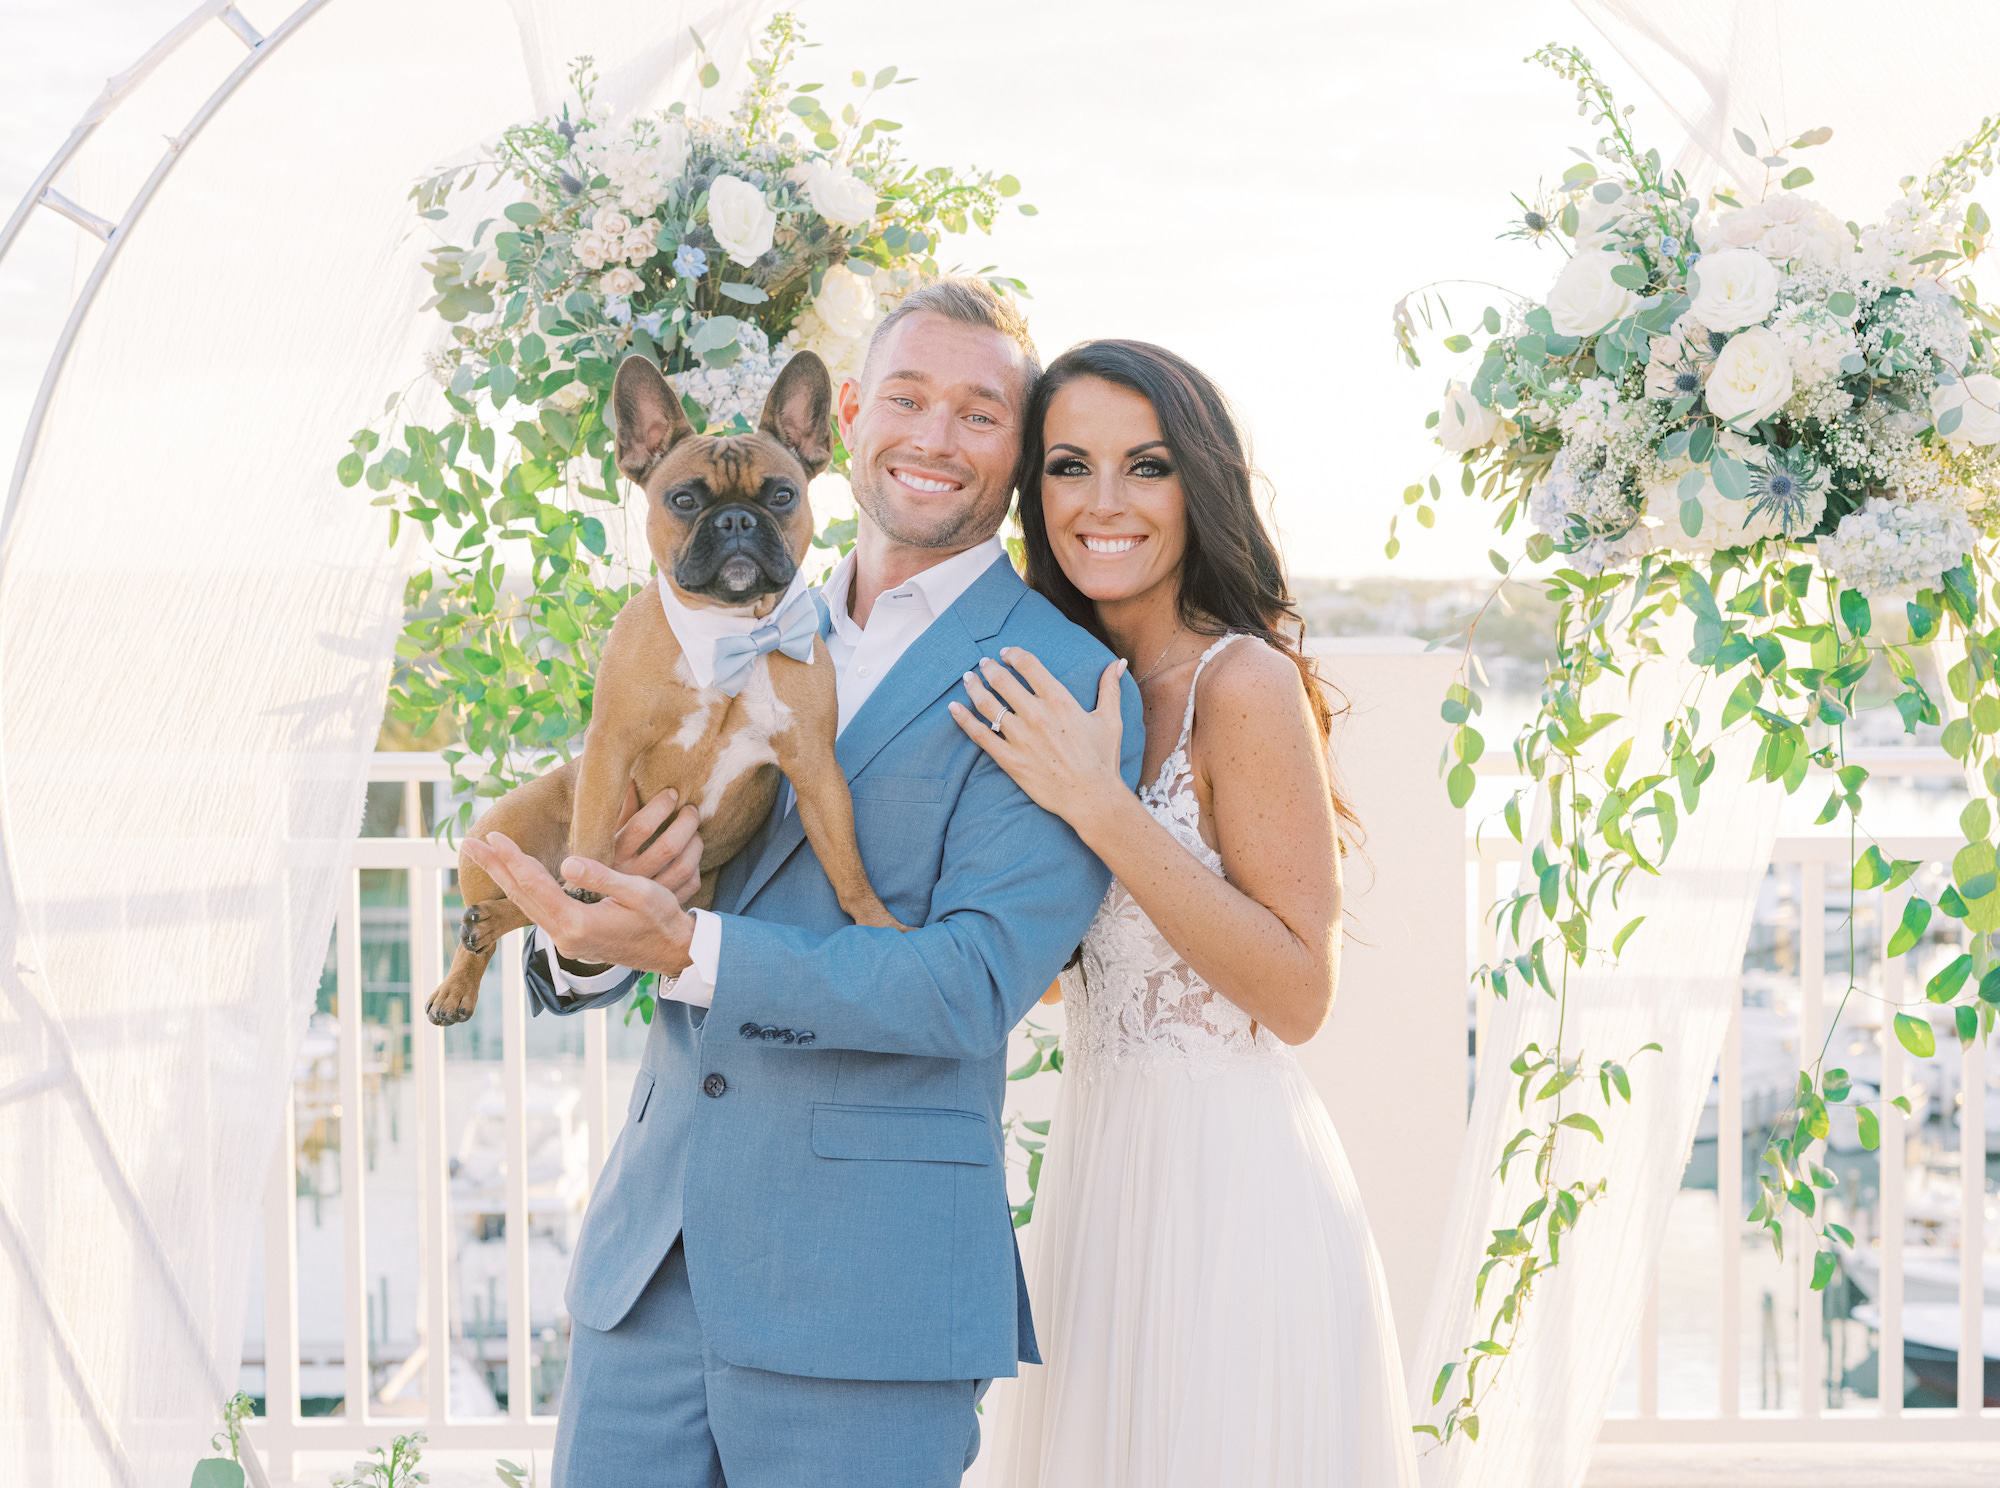 Bride and Groom with Dog Wedding Portrait